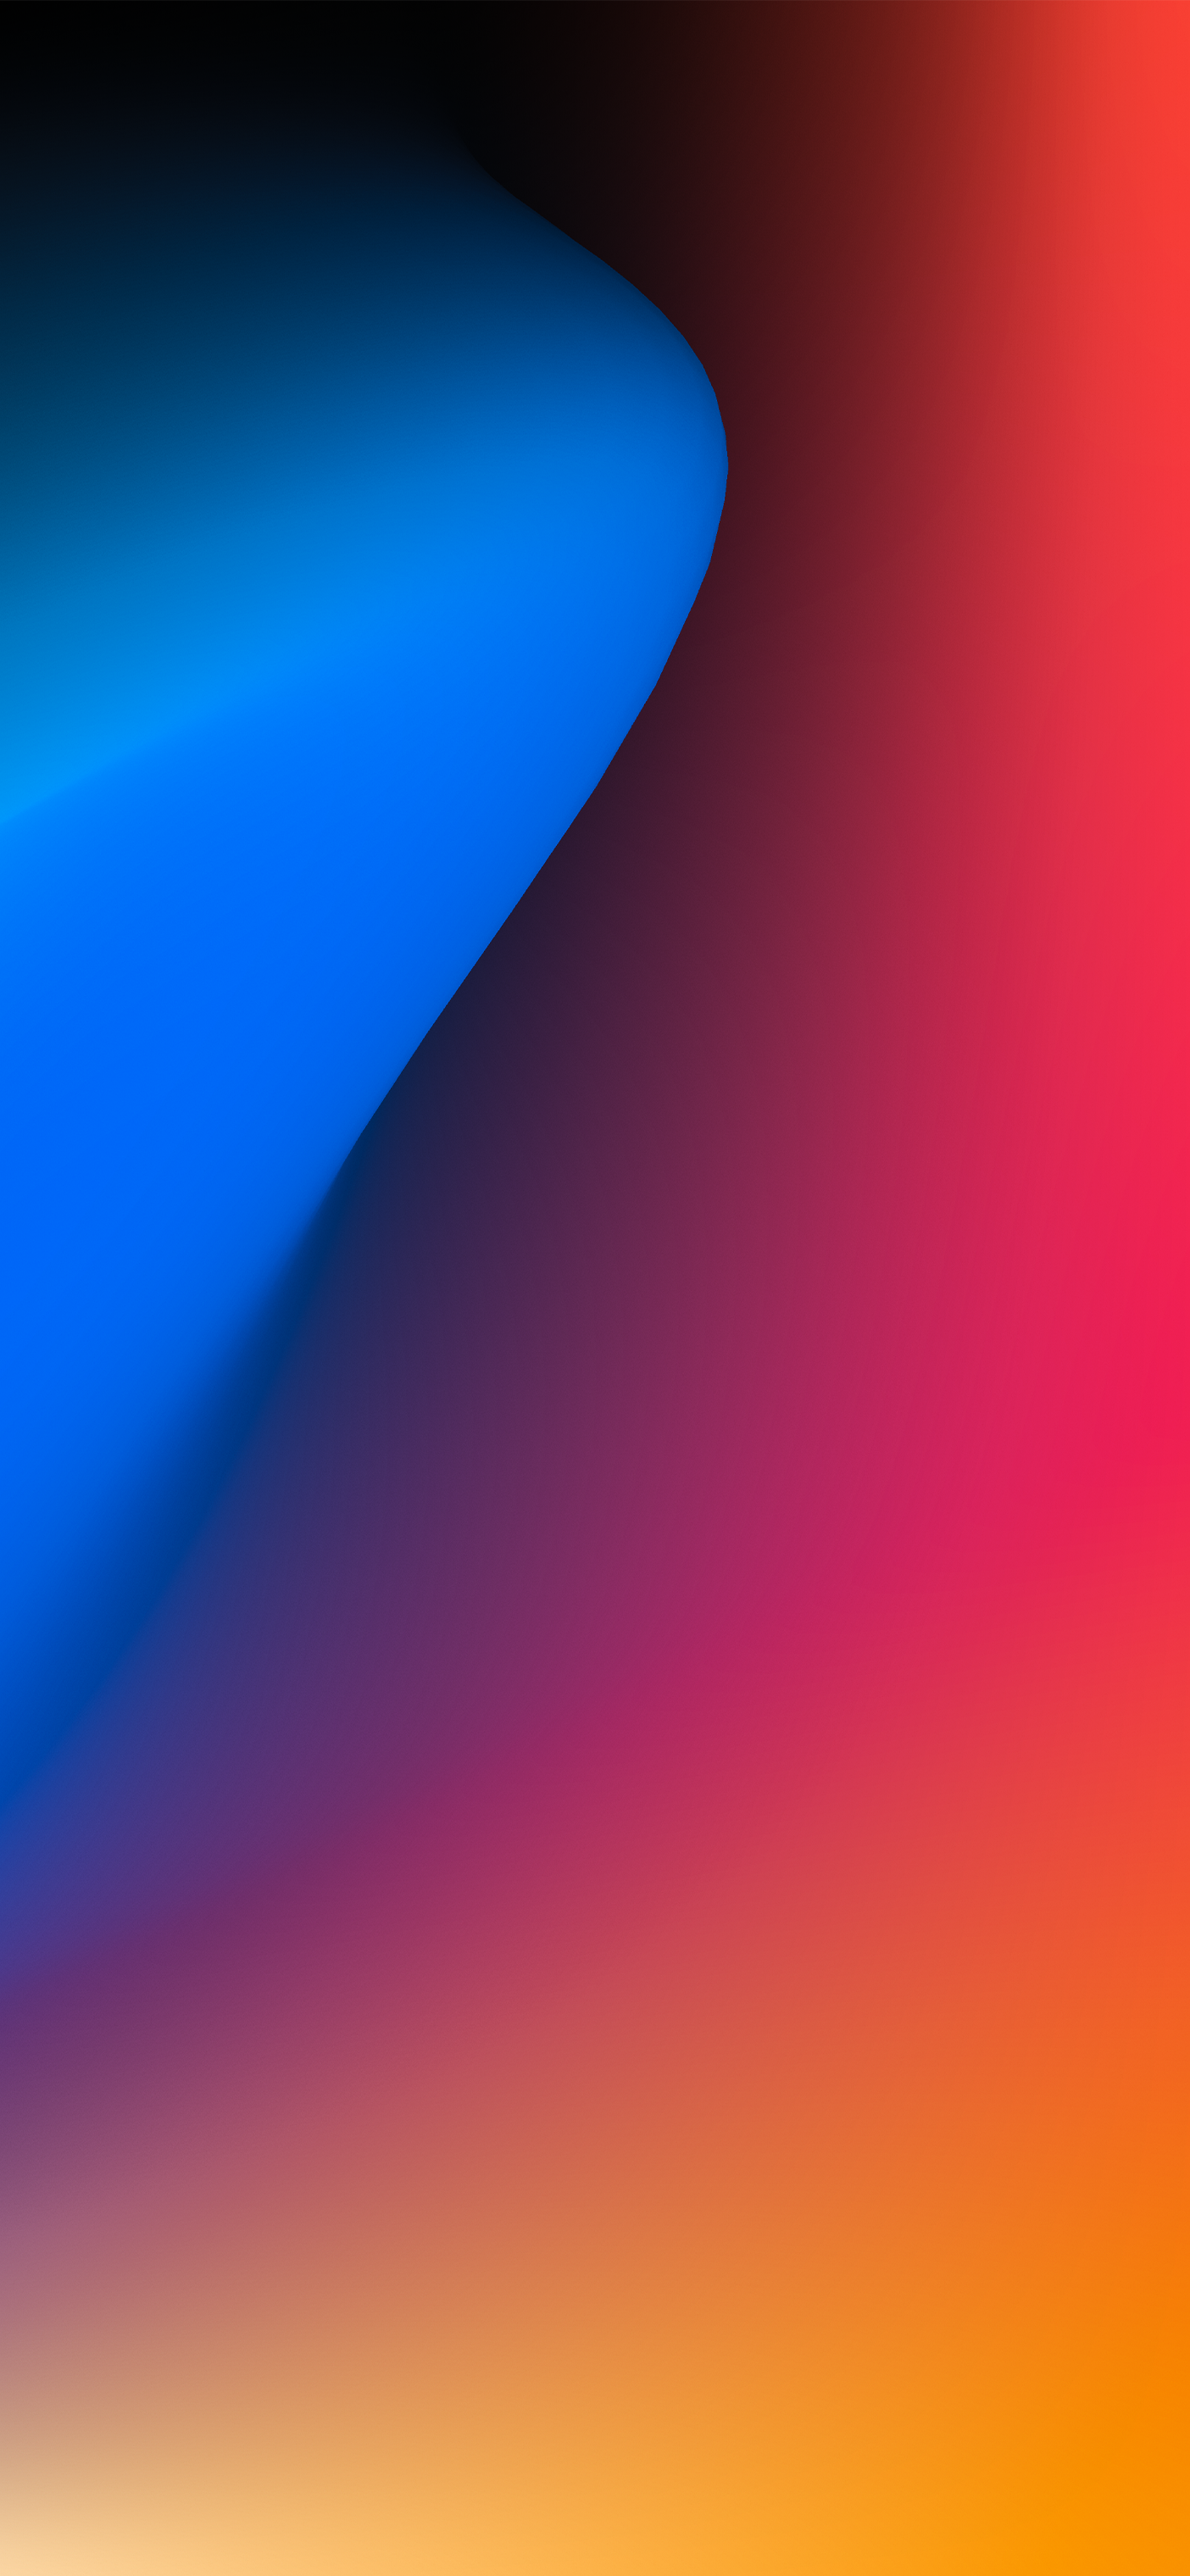 Ios Blue To Red Gradient Swoosh By Hk3ton Zollotech